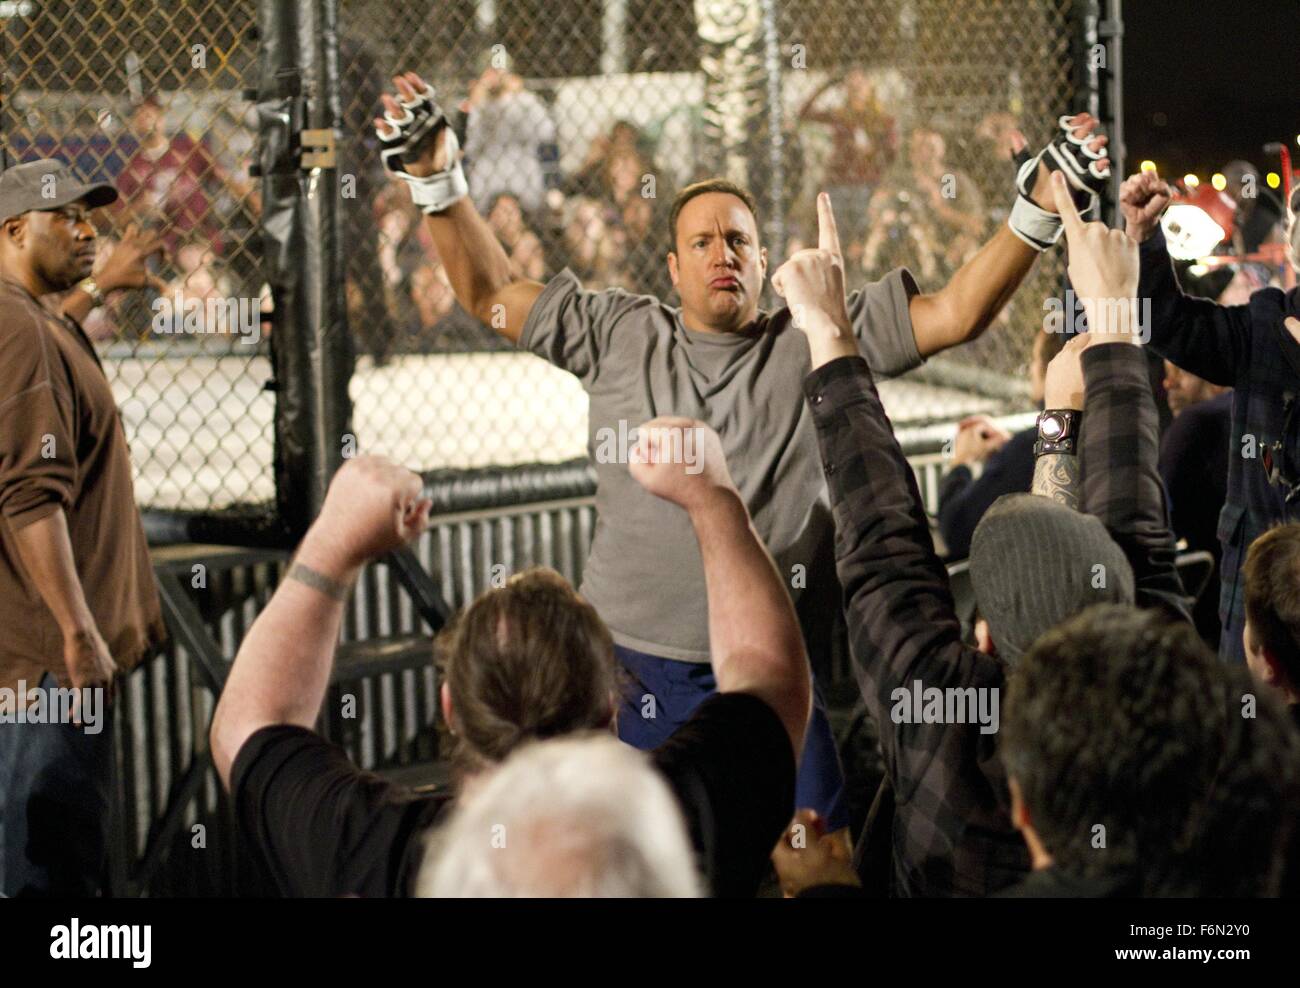 RELEASE DATE: October 12, 2012 MOVIE TITLE: Here Comes The Boom  STUDIO: Columbia Pictures DIRECTOR: Frank Coraci PLOT: A high school biology teacher looks to become a successful mixed-martial arts fighter in an effort to raise money to prevent extra-curricular activities from being axed at his cash-strapped school PICTURED: KEVIN JAMES as Scott (Credit: c Columbia Pictures/Entertainment Pictures) Stock Photo